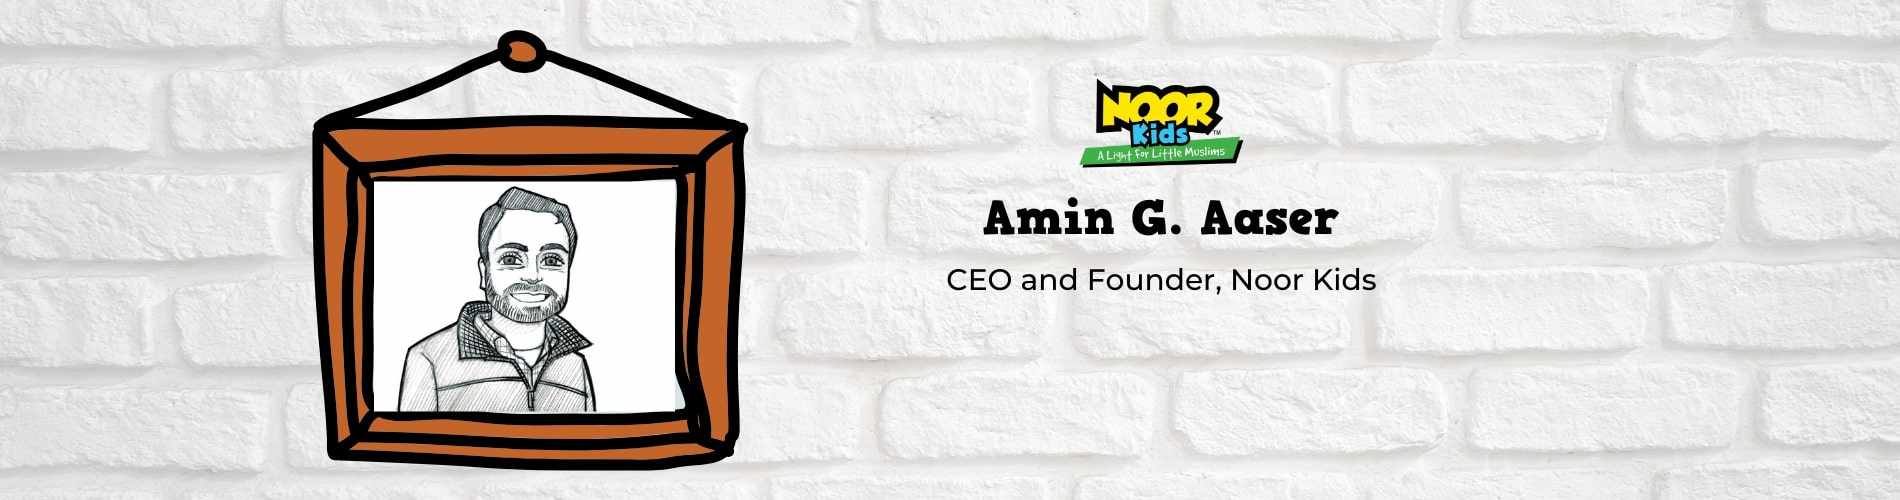 Meet Amin Aaser, Founder and Executive Director of Noor Kids